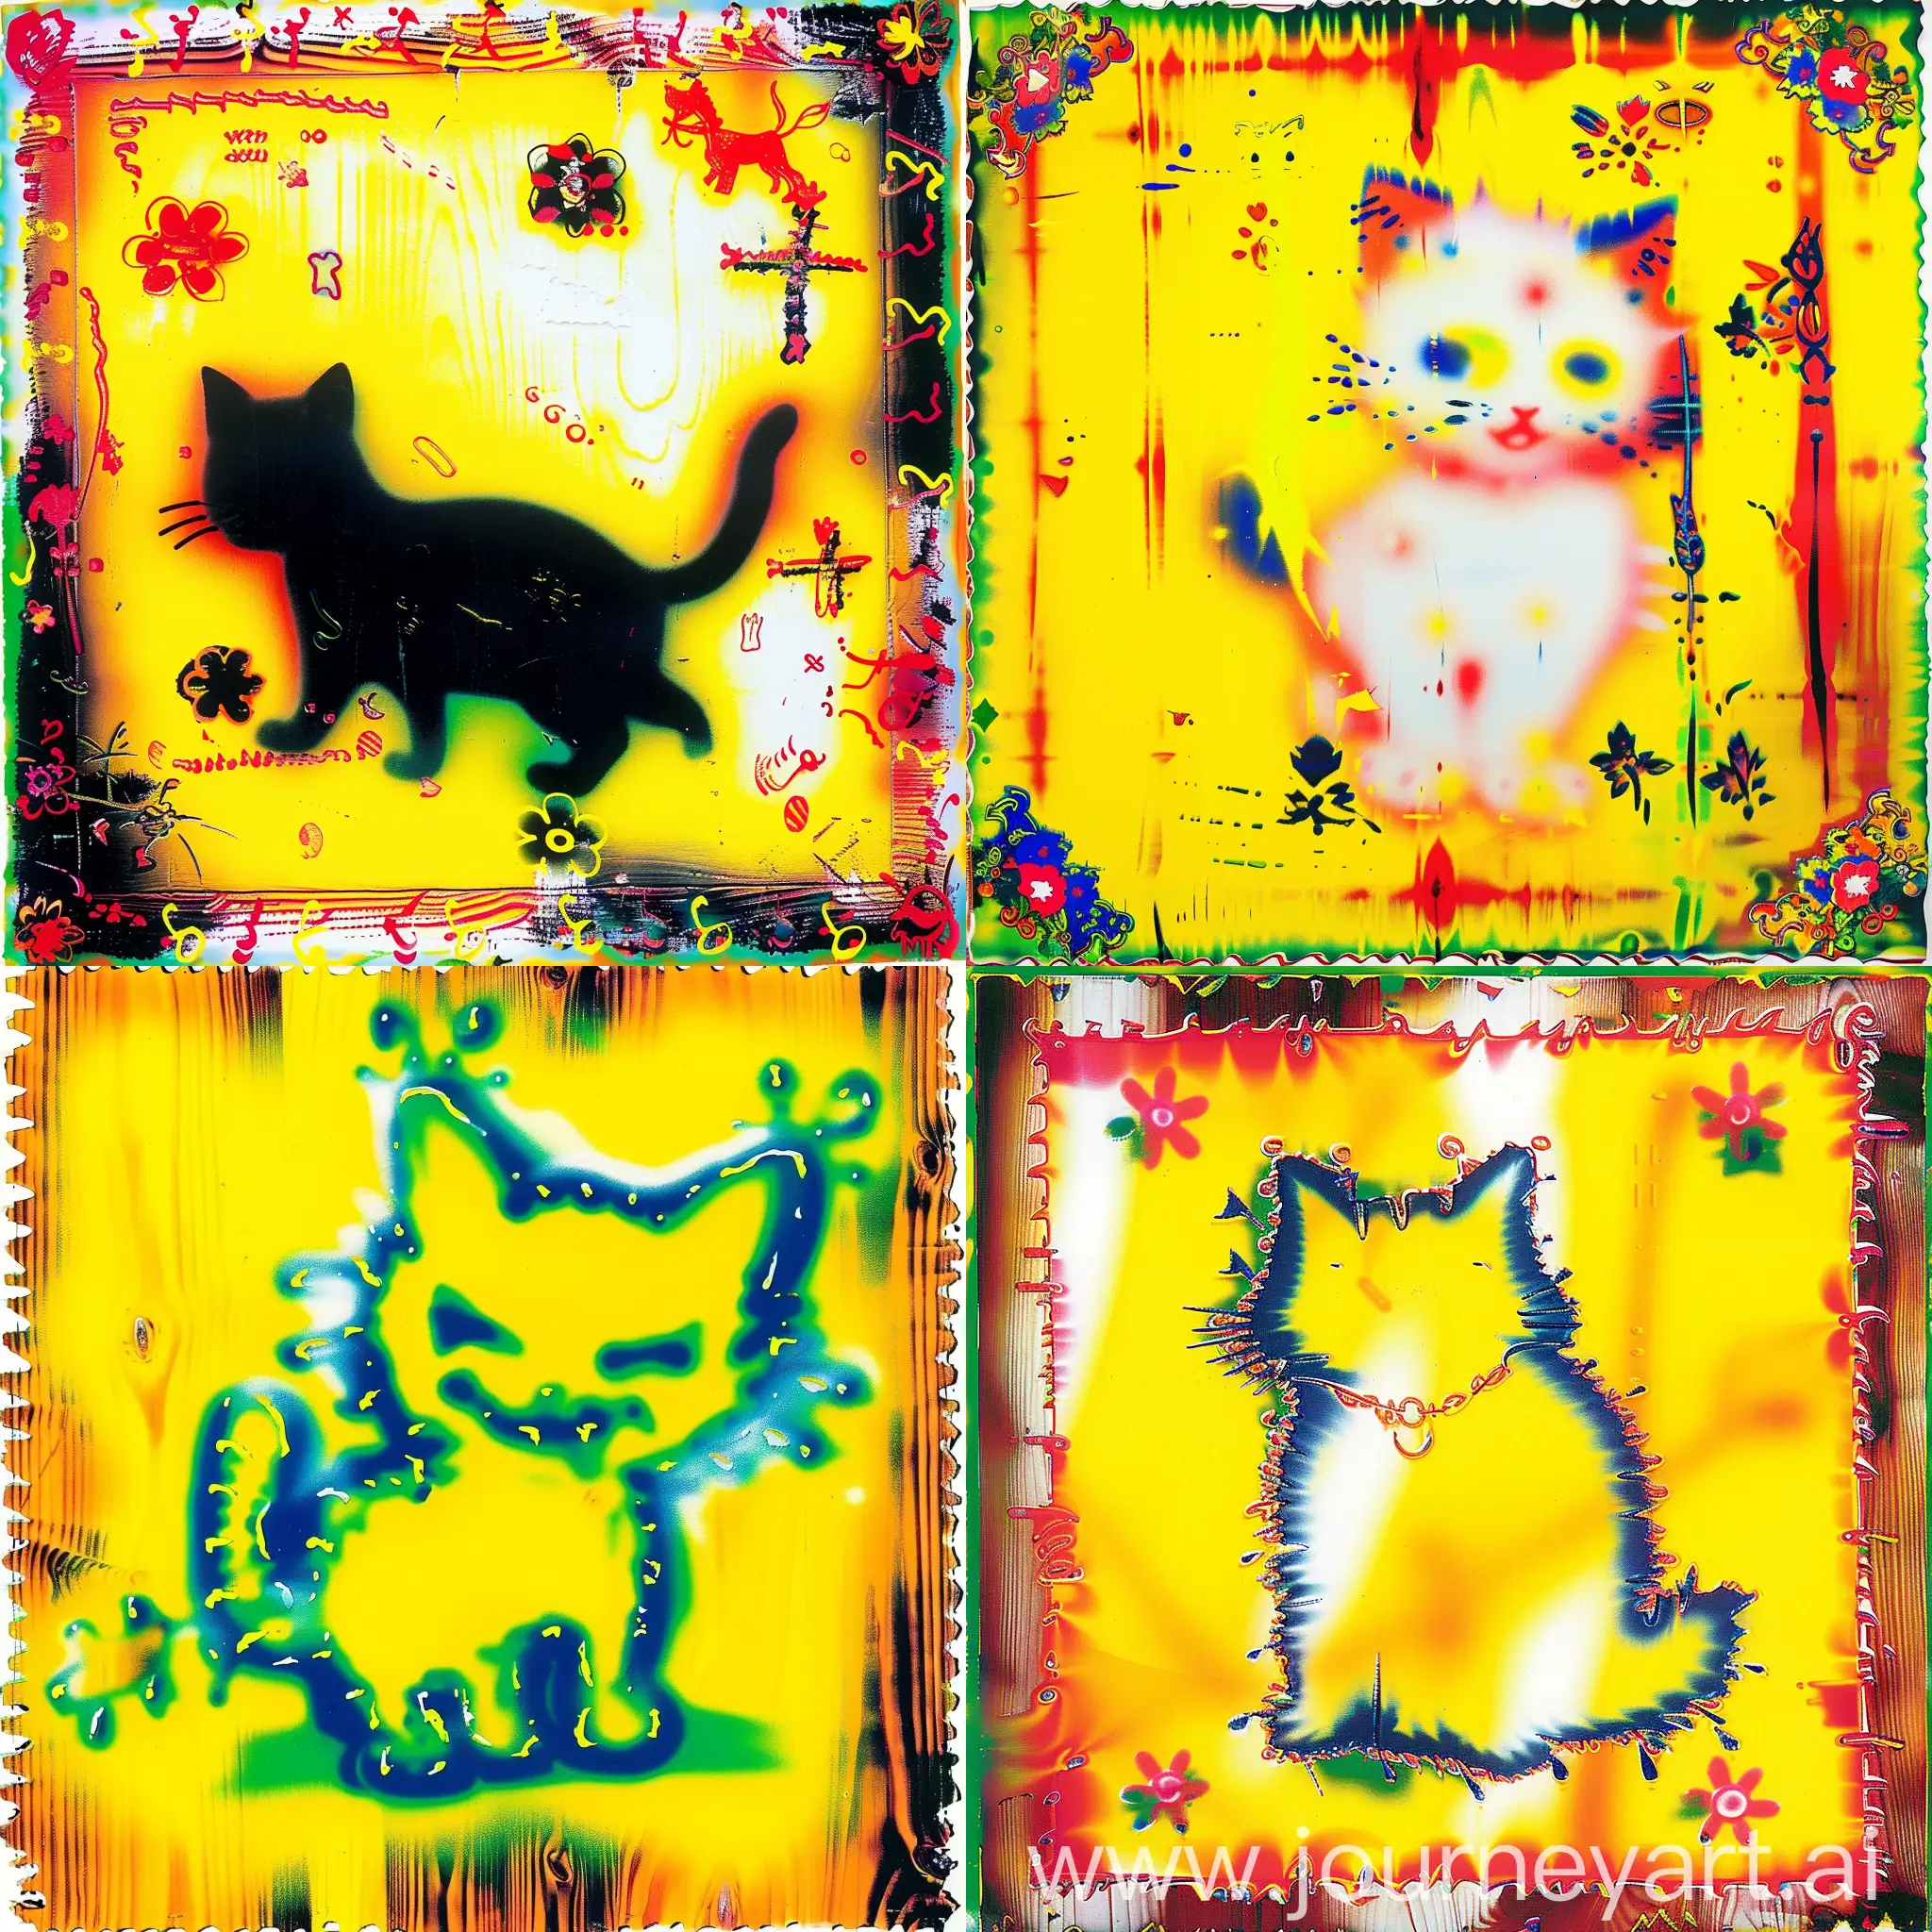 cat stencil, a simple silhouette, along the edges - patterns of flowers in the style of Russian splint, khokhloma, handkerchief paintings, traditional trails, wood painting, neon green, negative promt yellow color, soft decorative painting, wood texture, --v 6.0 --s 50 --style raw --sref https://i.postimg.cc/6qKHCXKy/a5c97598380eb92df84f99c69b446d49.jpg